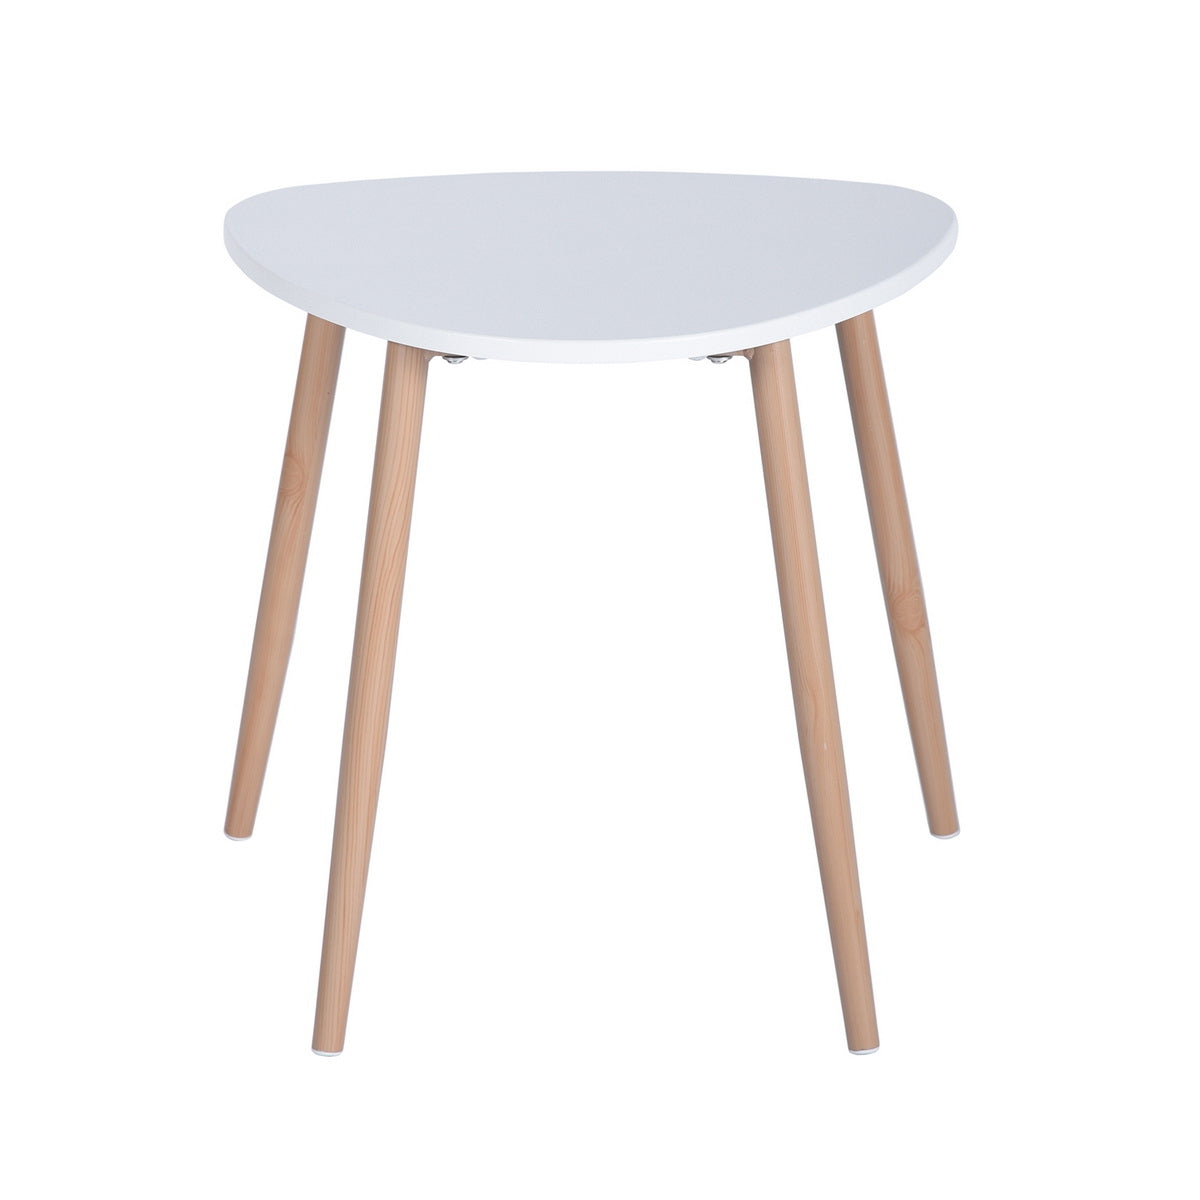 Set of 2 nesting coffee tables with rounded corners, Scandinavian style in wood - BULLS & KREUZ A